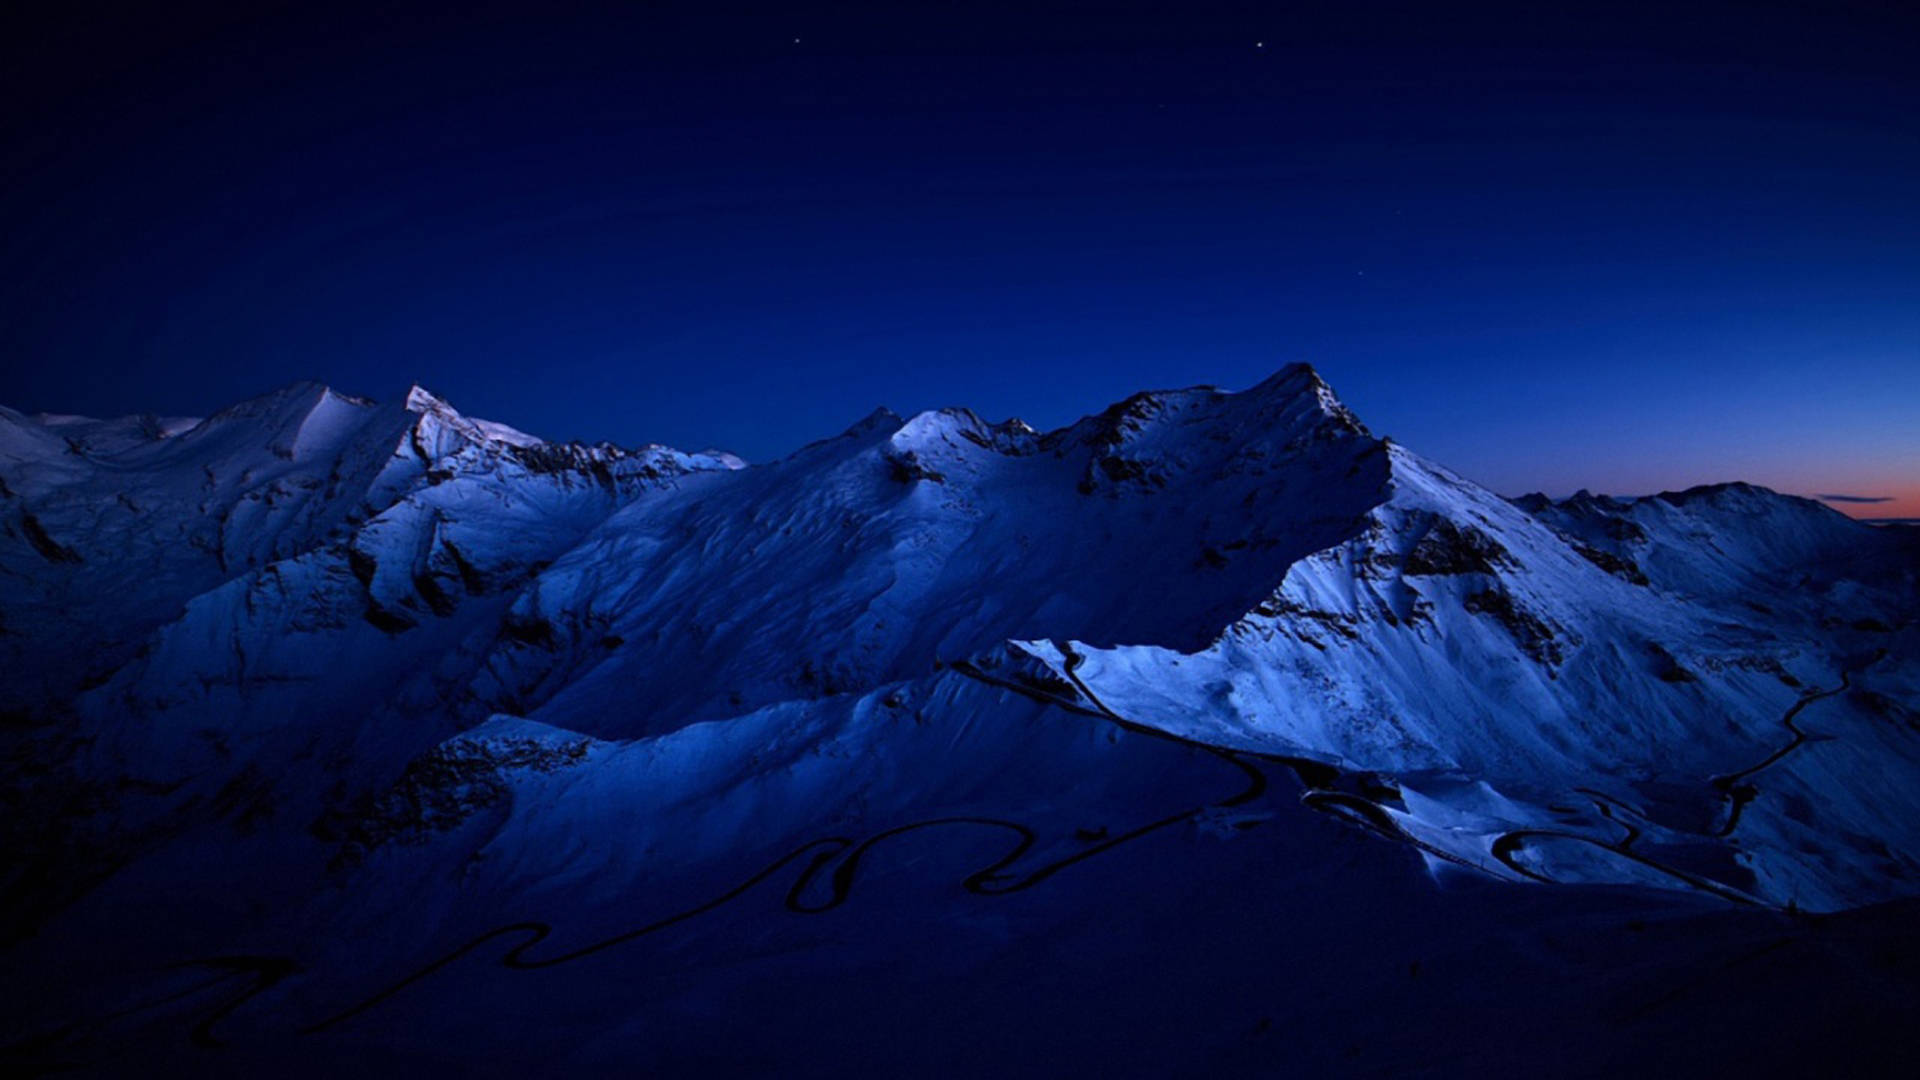 Dark Blue Aesthetic Snow-capped Mountain Background